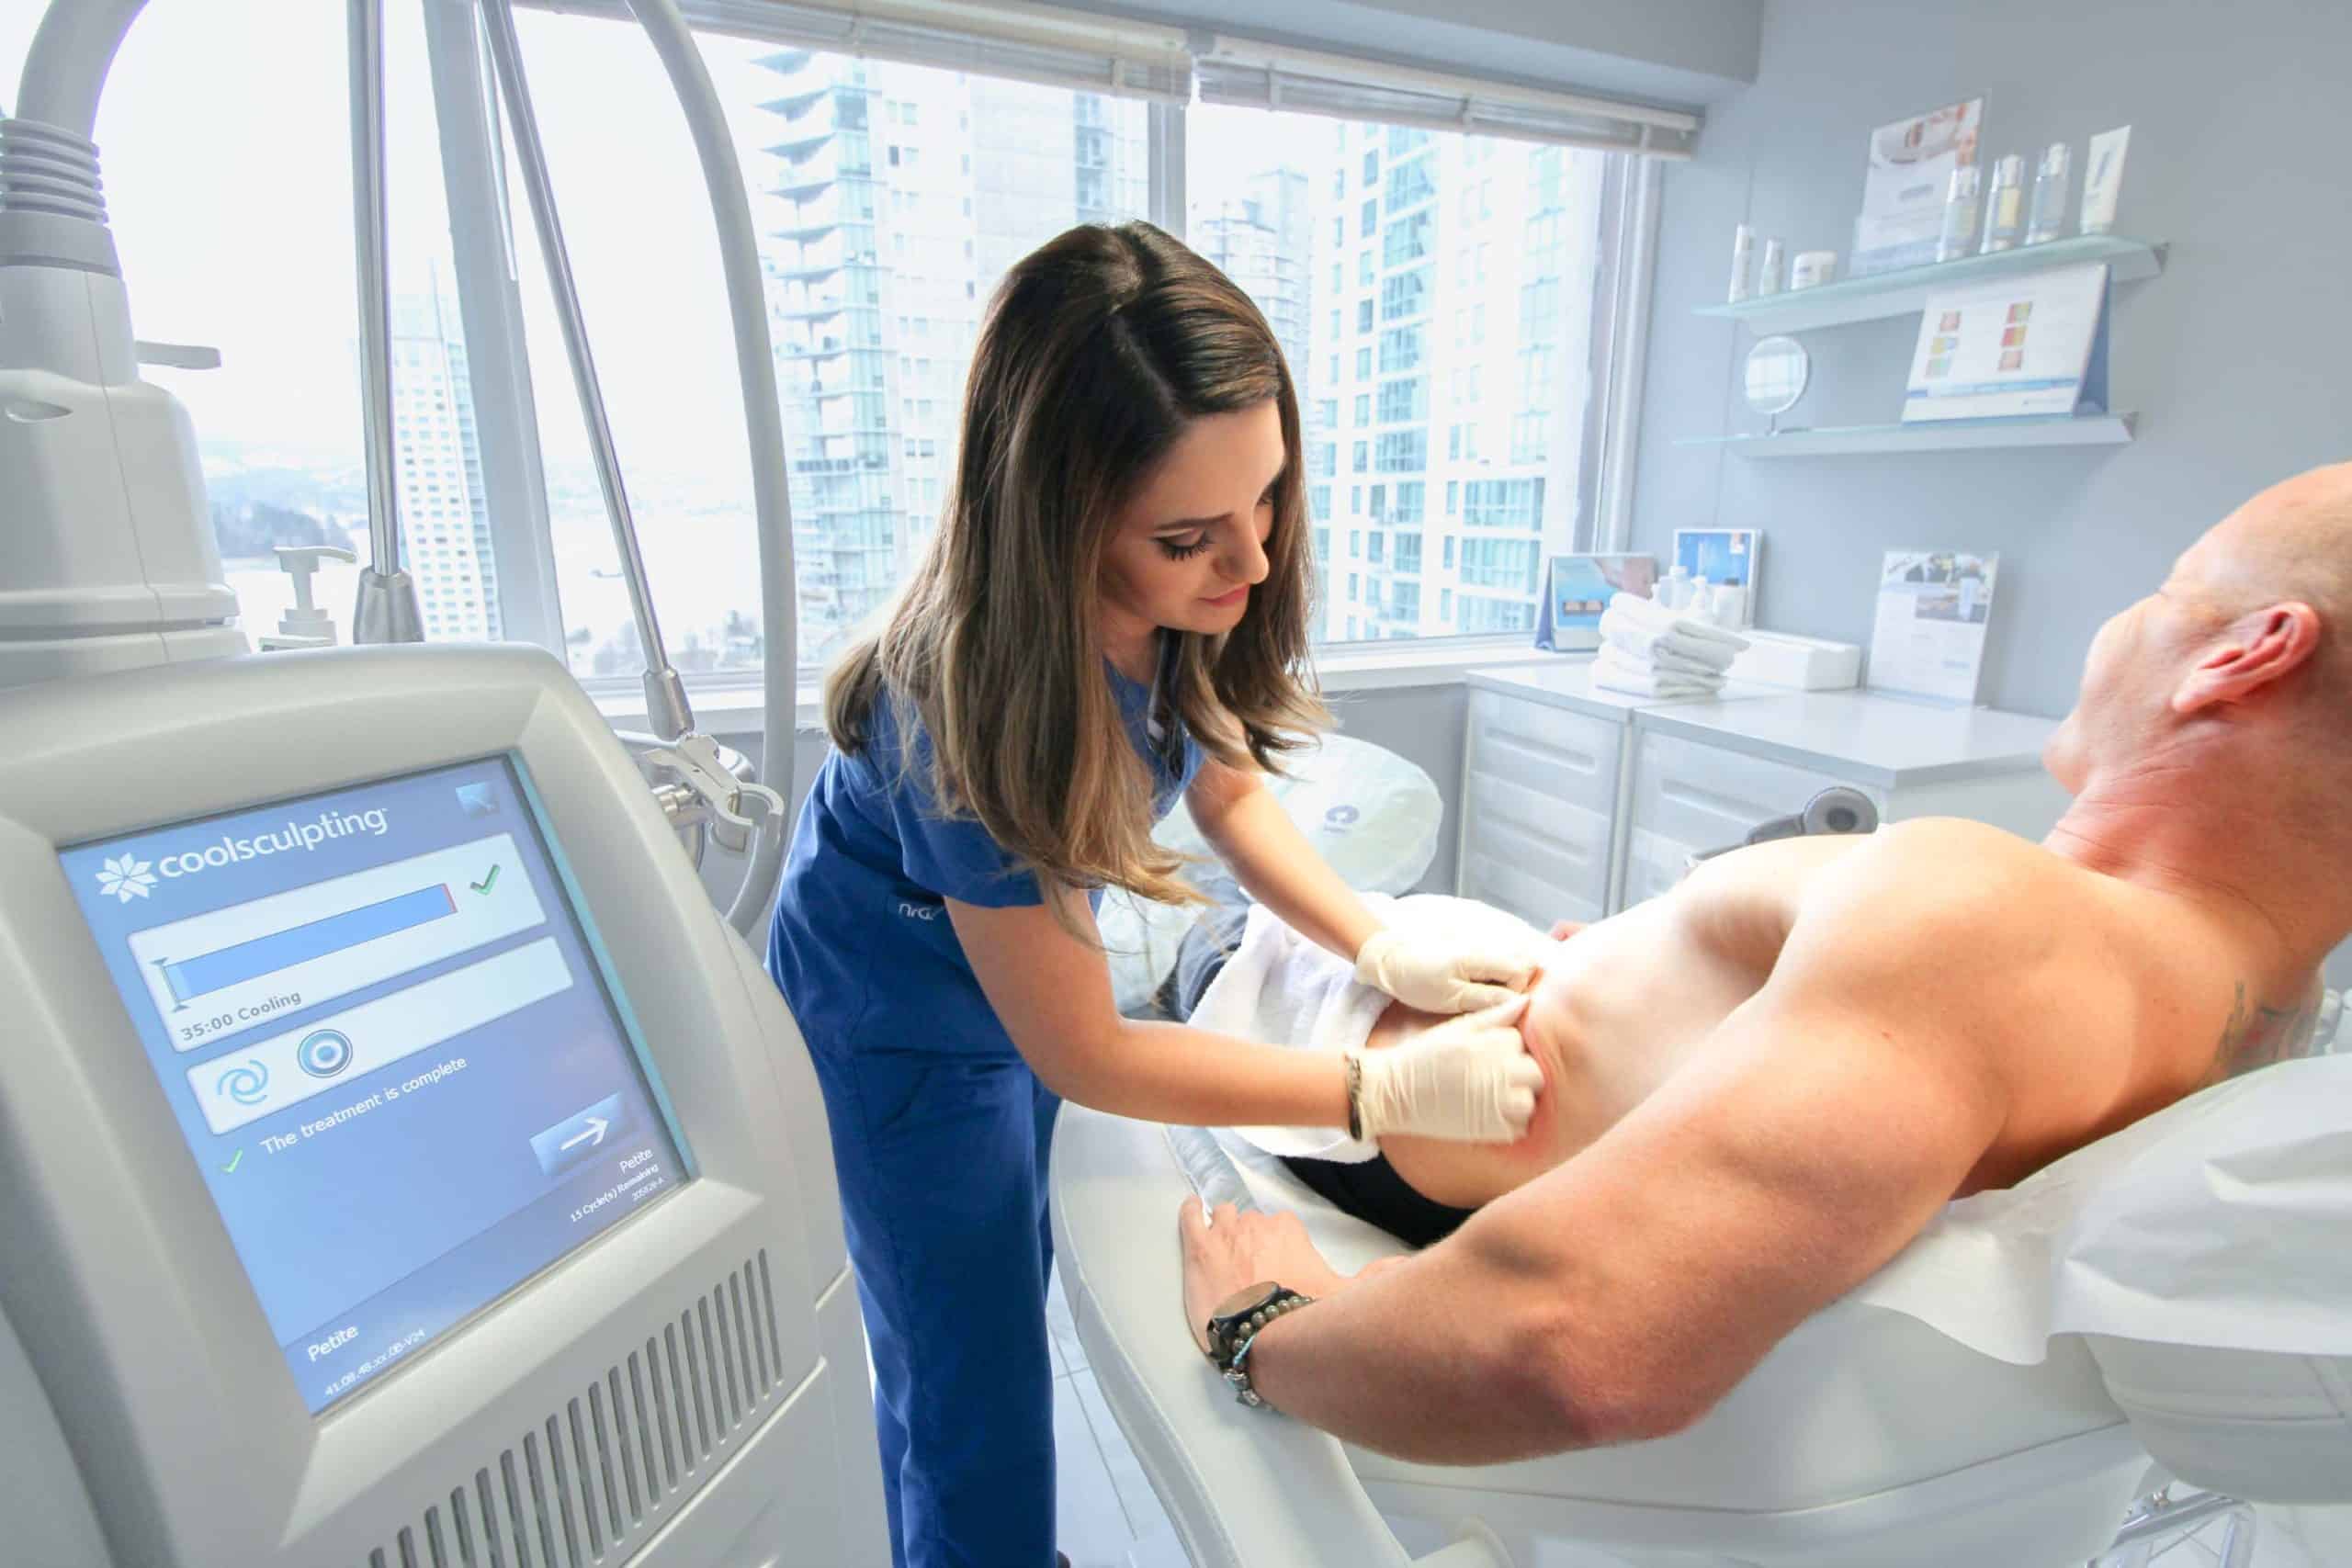 A consultant working with a patient before a coolsculpting treatment, discussing coolsculpting cost estimates